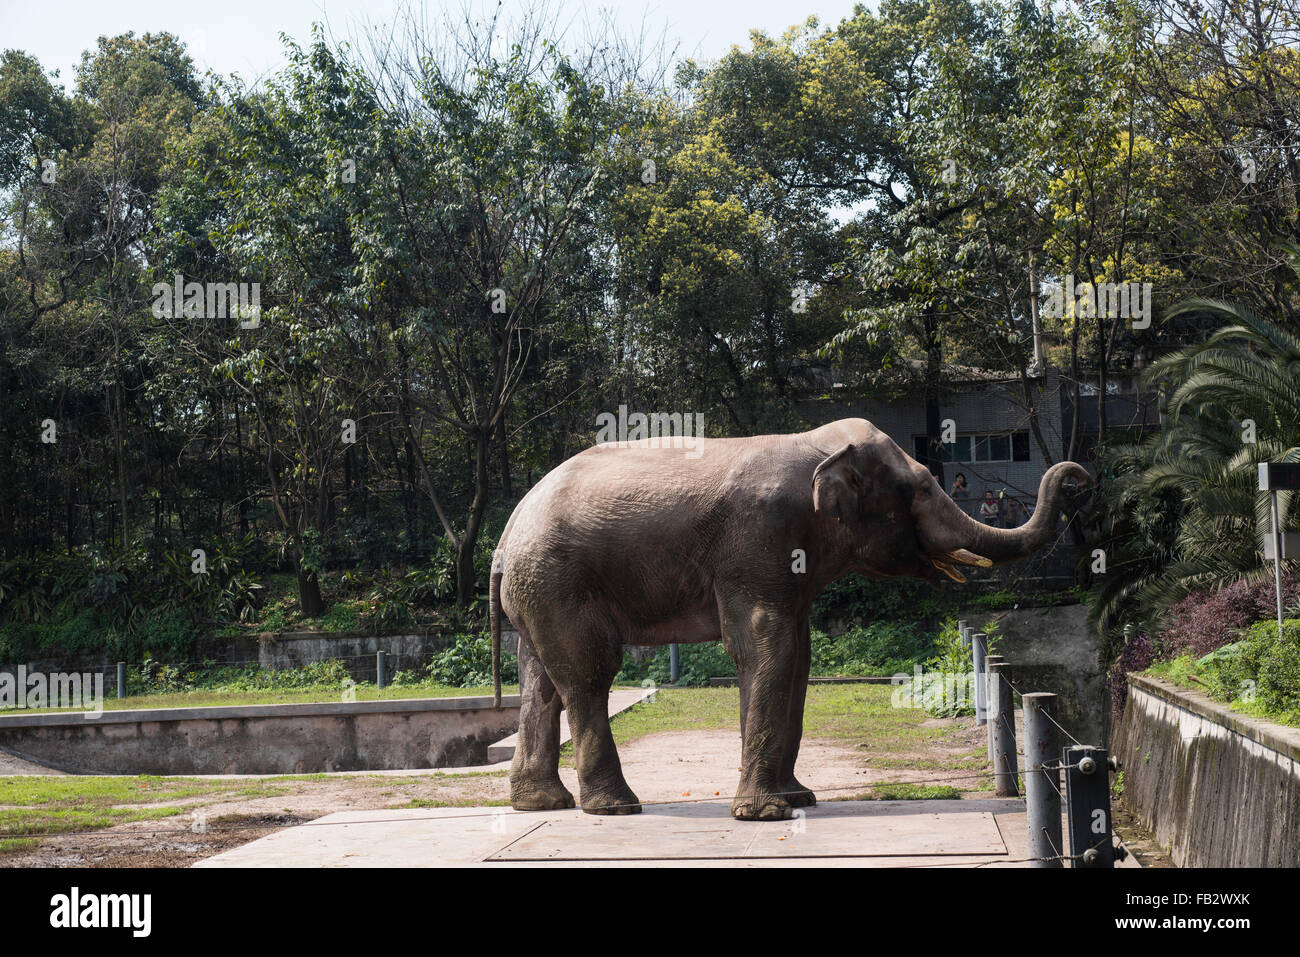 elephant profile side view standing up at chongqing zoo in China. Stock Photo